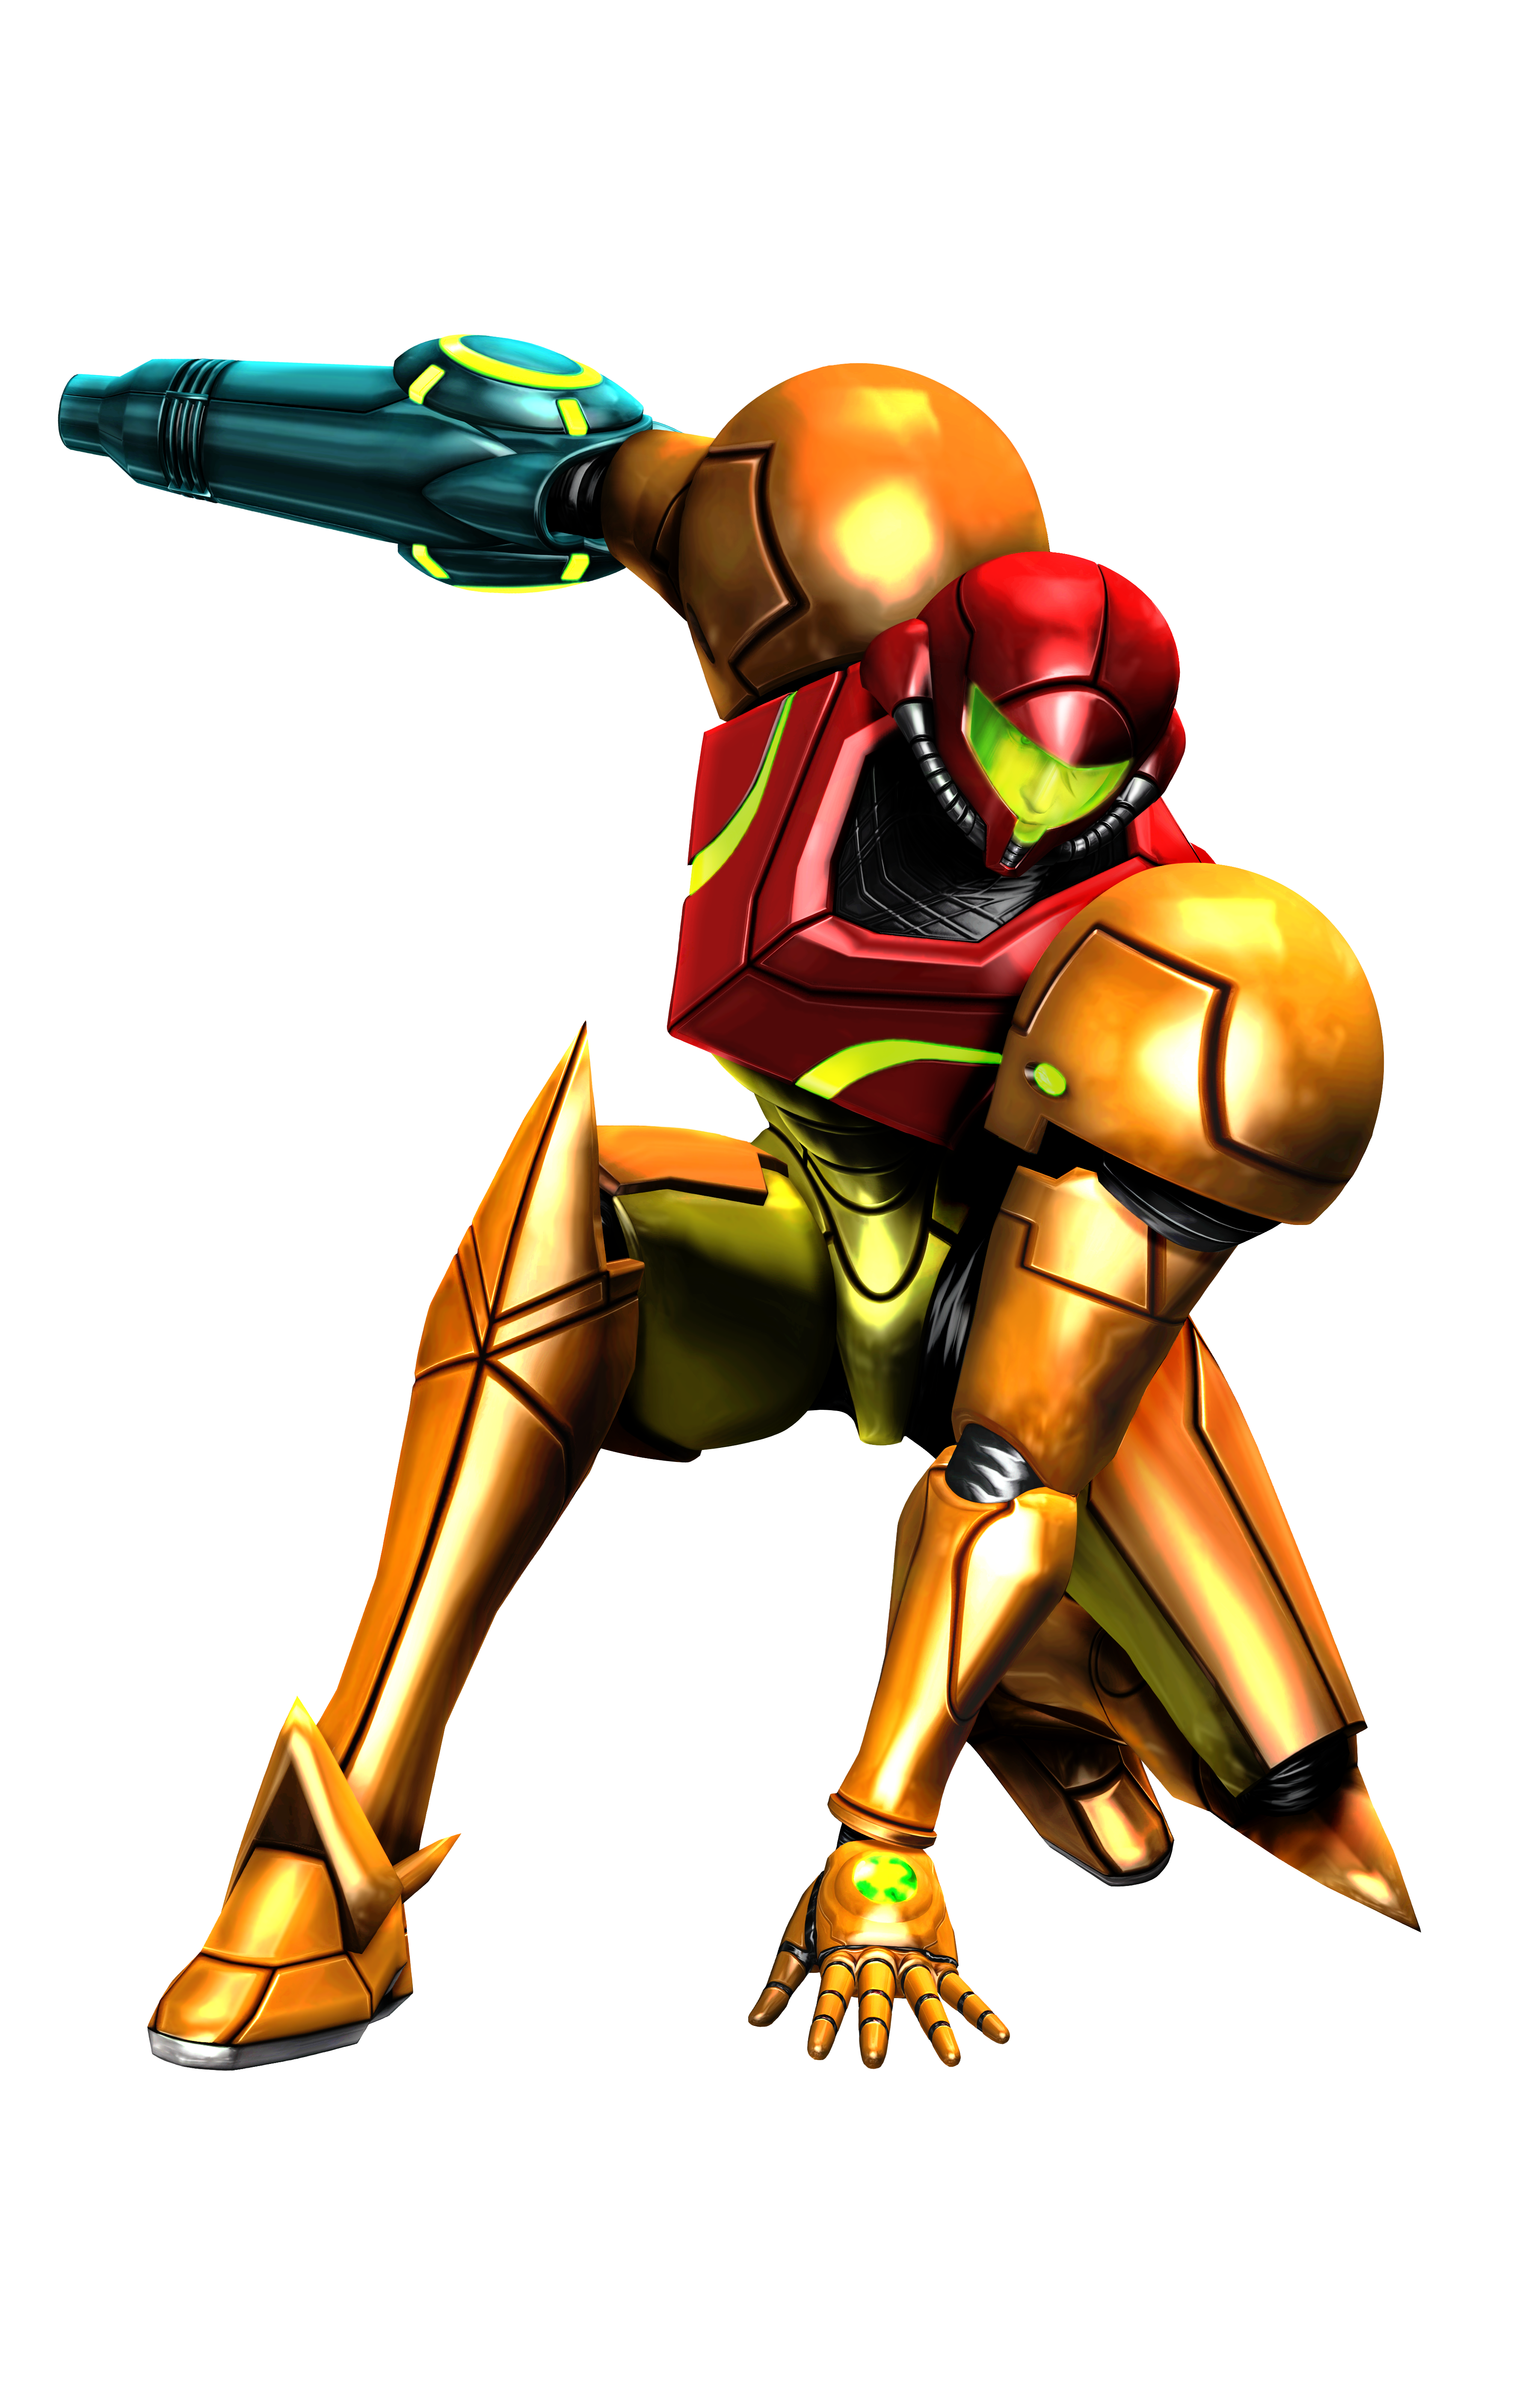 Artwork And Renders Metroid Other M Metroid Recon